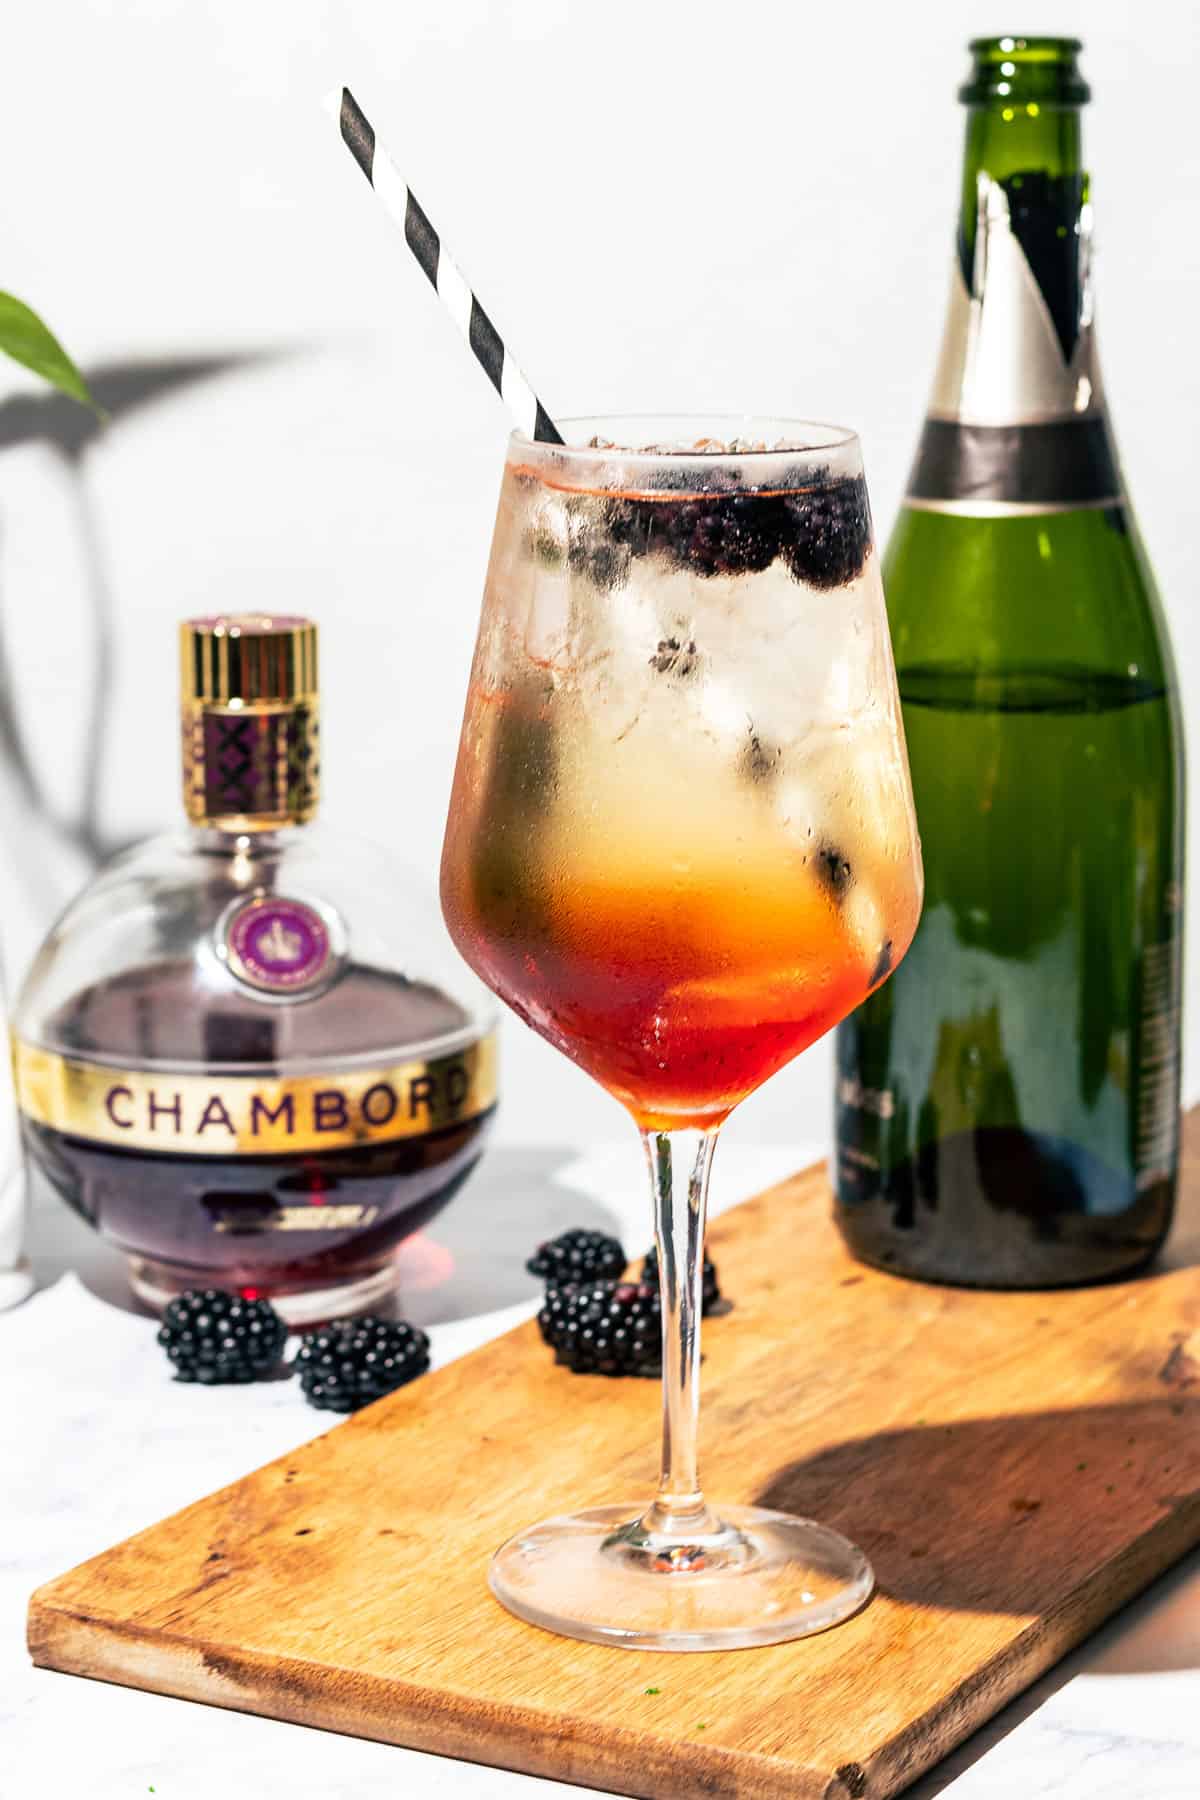 Spritz on a wood cutting board with a bottle of Champagne and Chambord in the background.